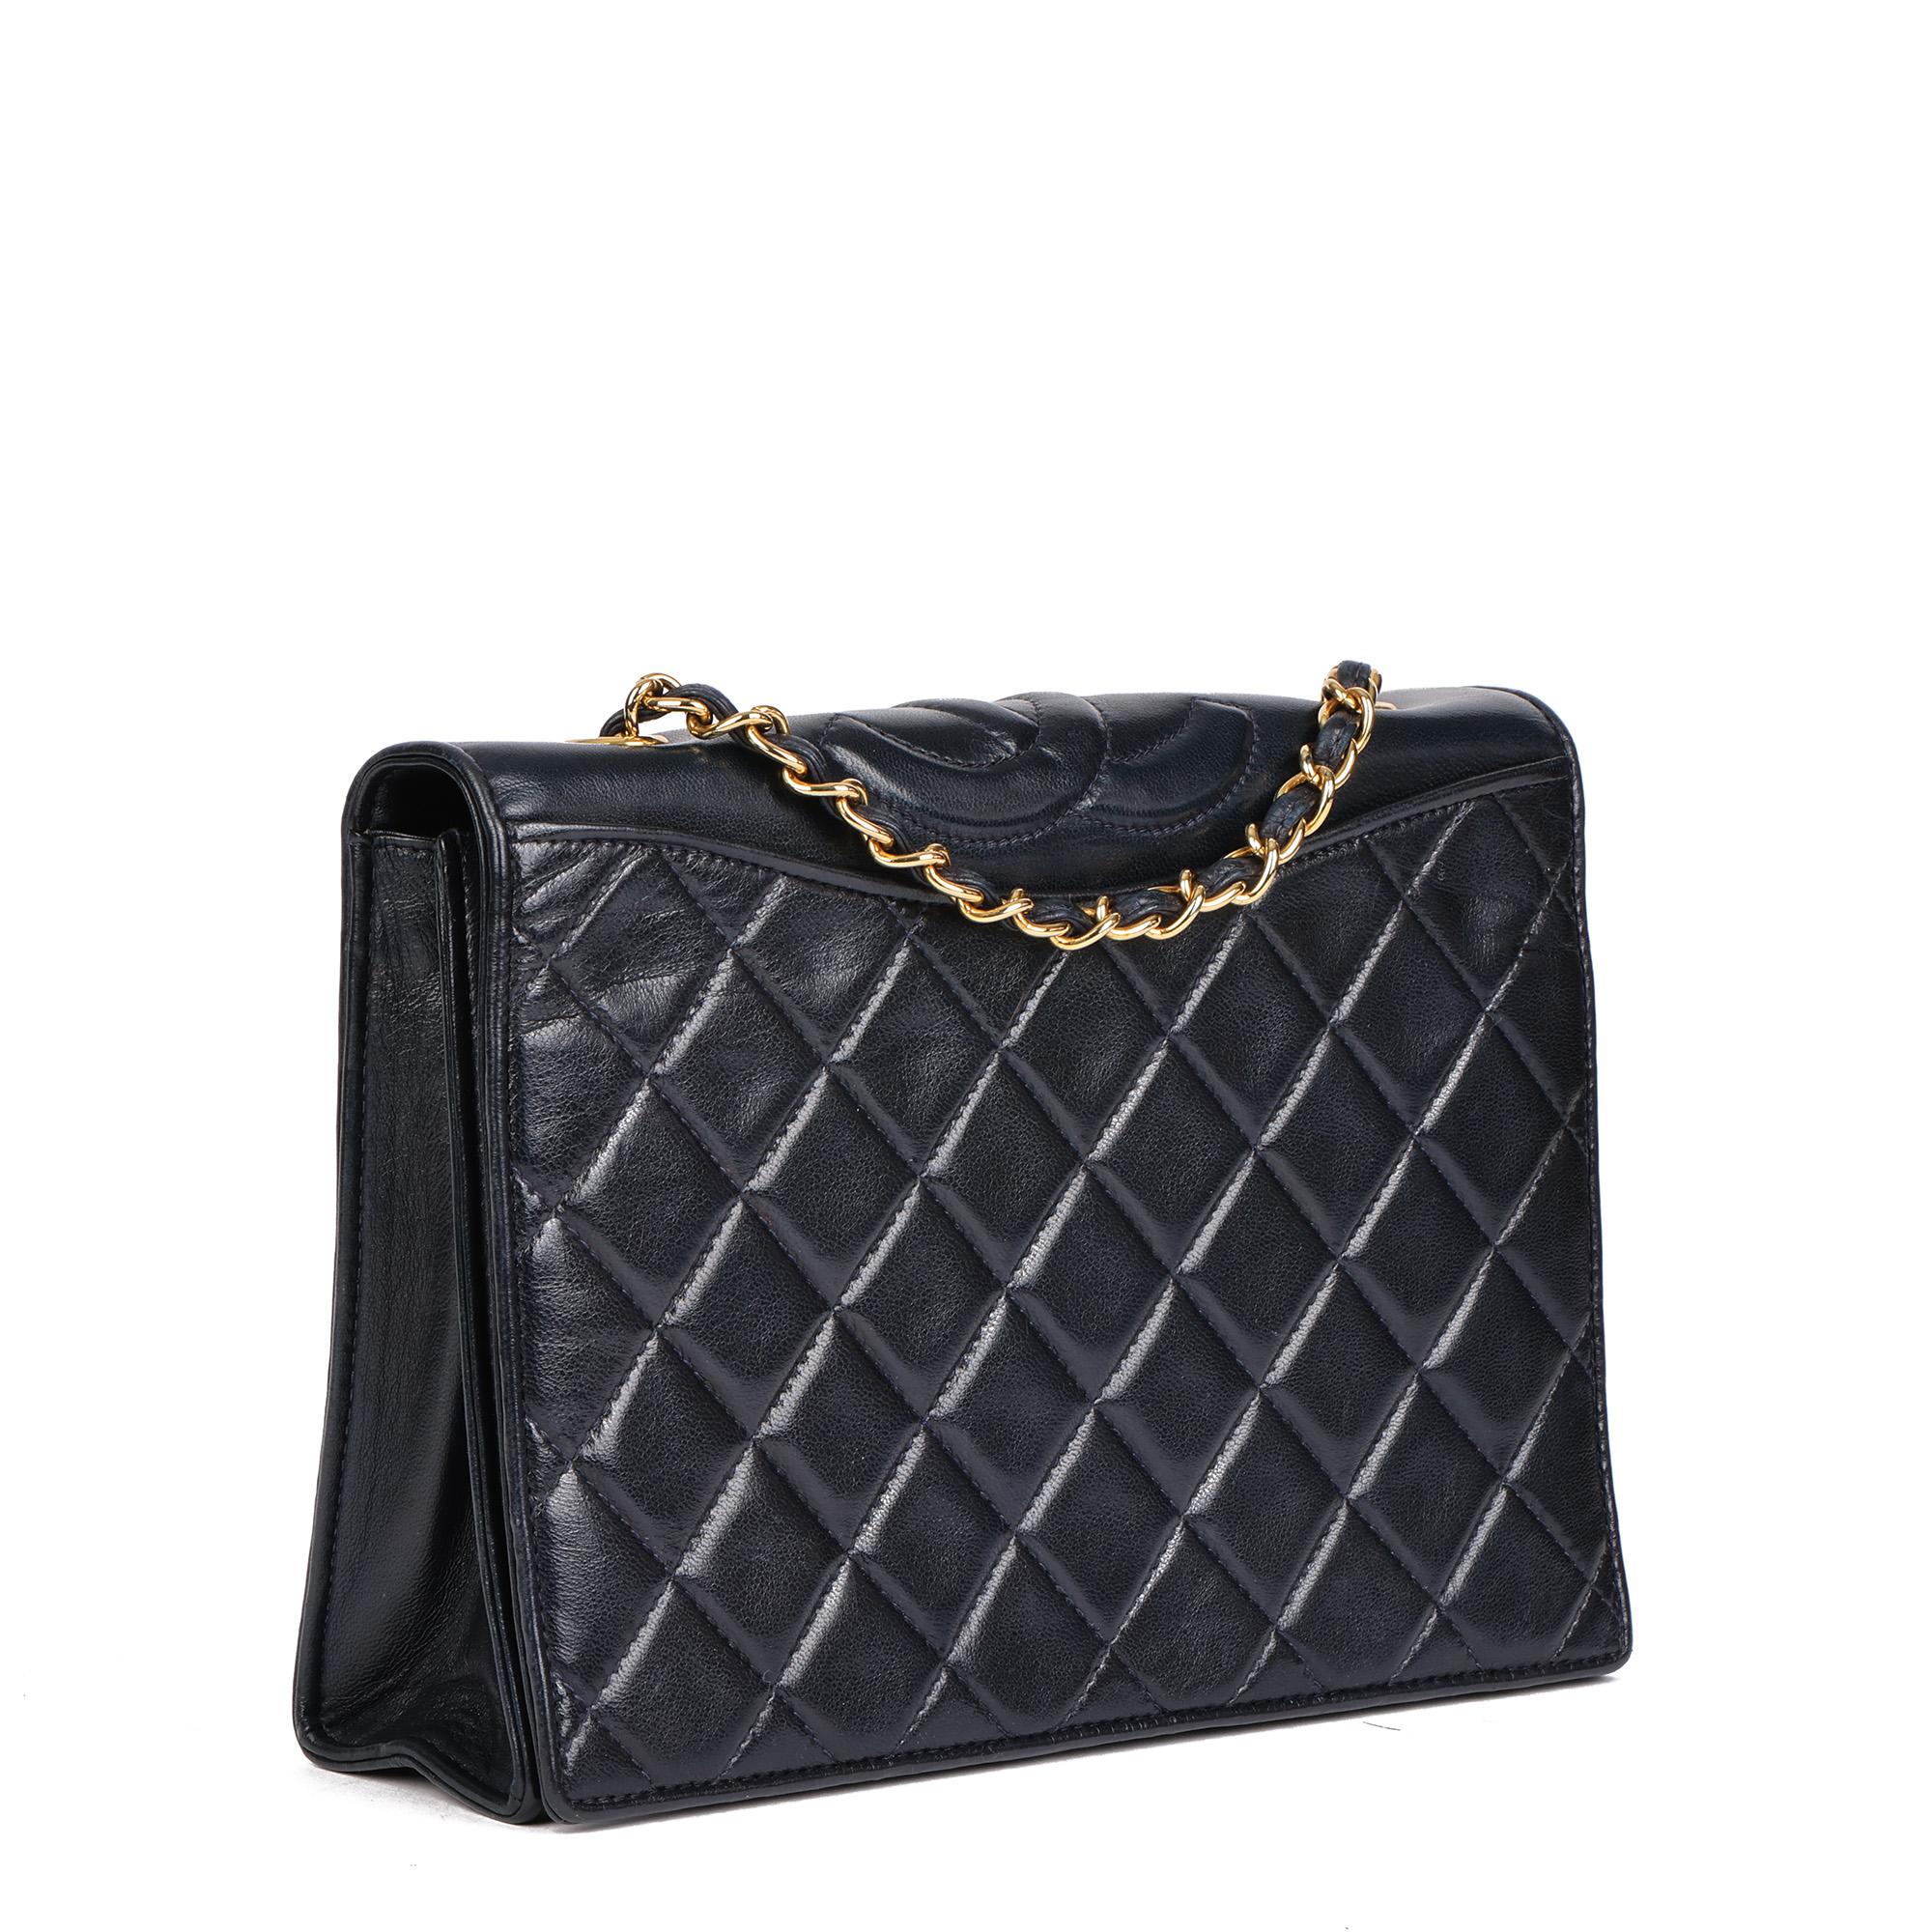 CHANEL
Navy Quilted Lambskin Vintage Small Timeless Single Full Flap Bag

Xupes Reference: HB4612
Serial Number: 1321396
Age (Circa): 1990
Accompanied By: Chanel Dust Bag, Authenticity Card, Protective Felt
Authenticity Details: Authenticity Card,